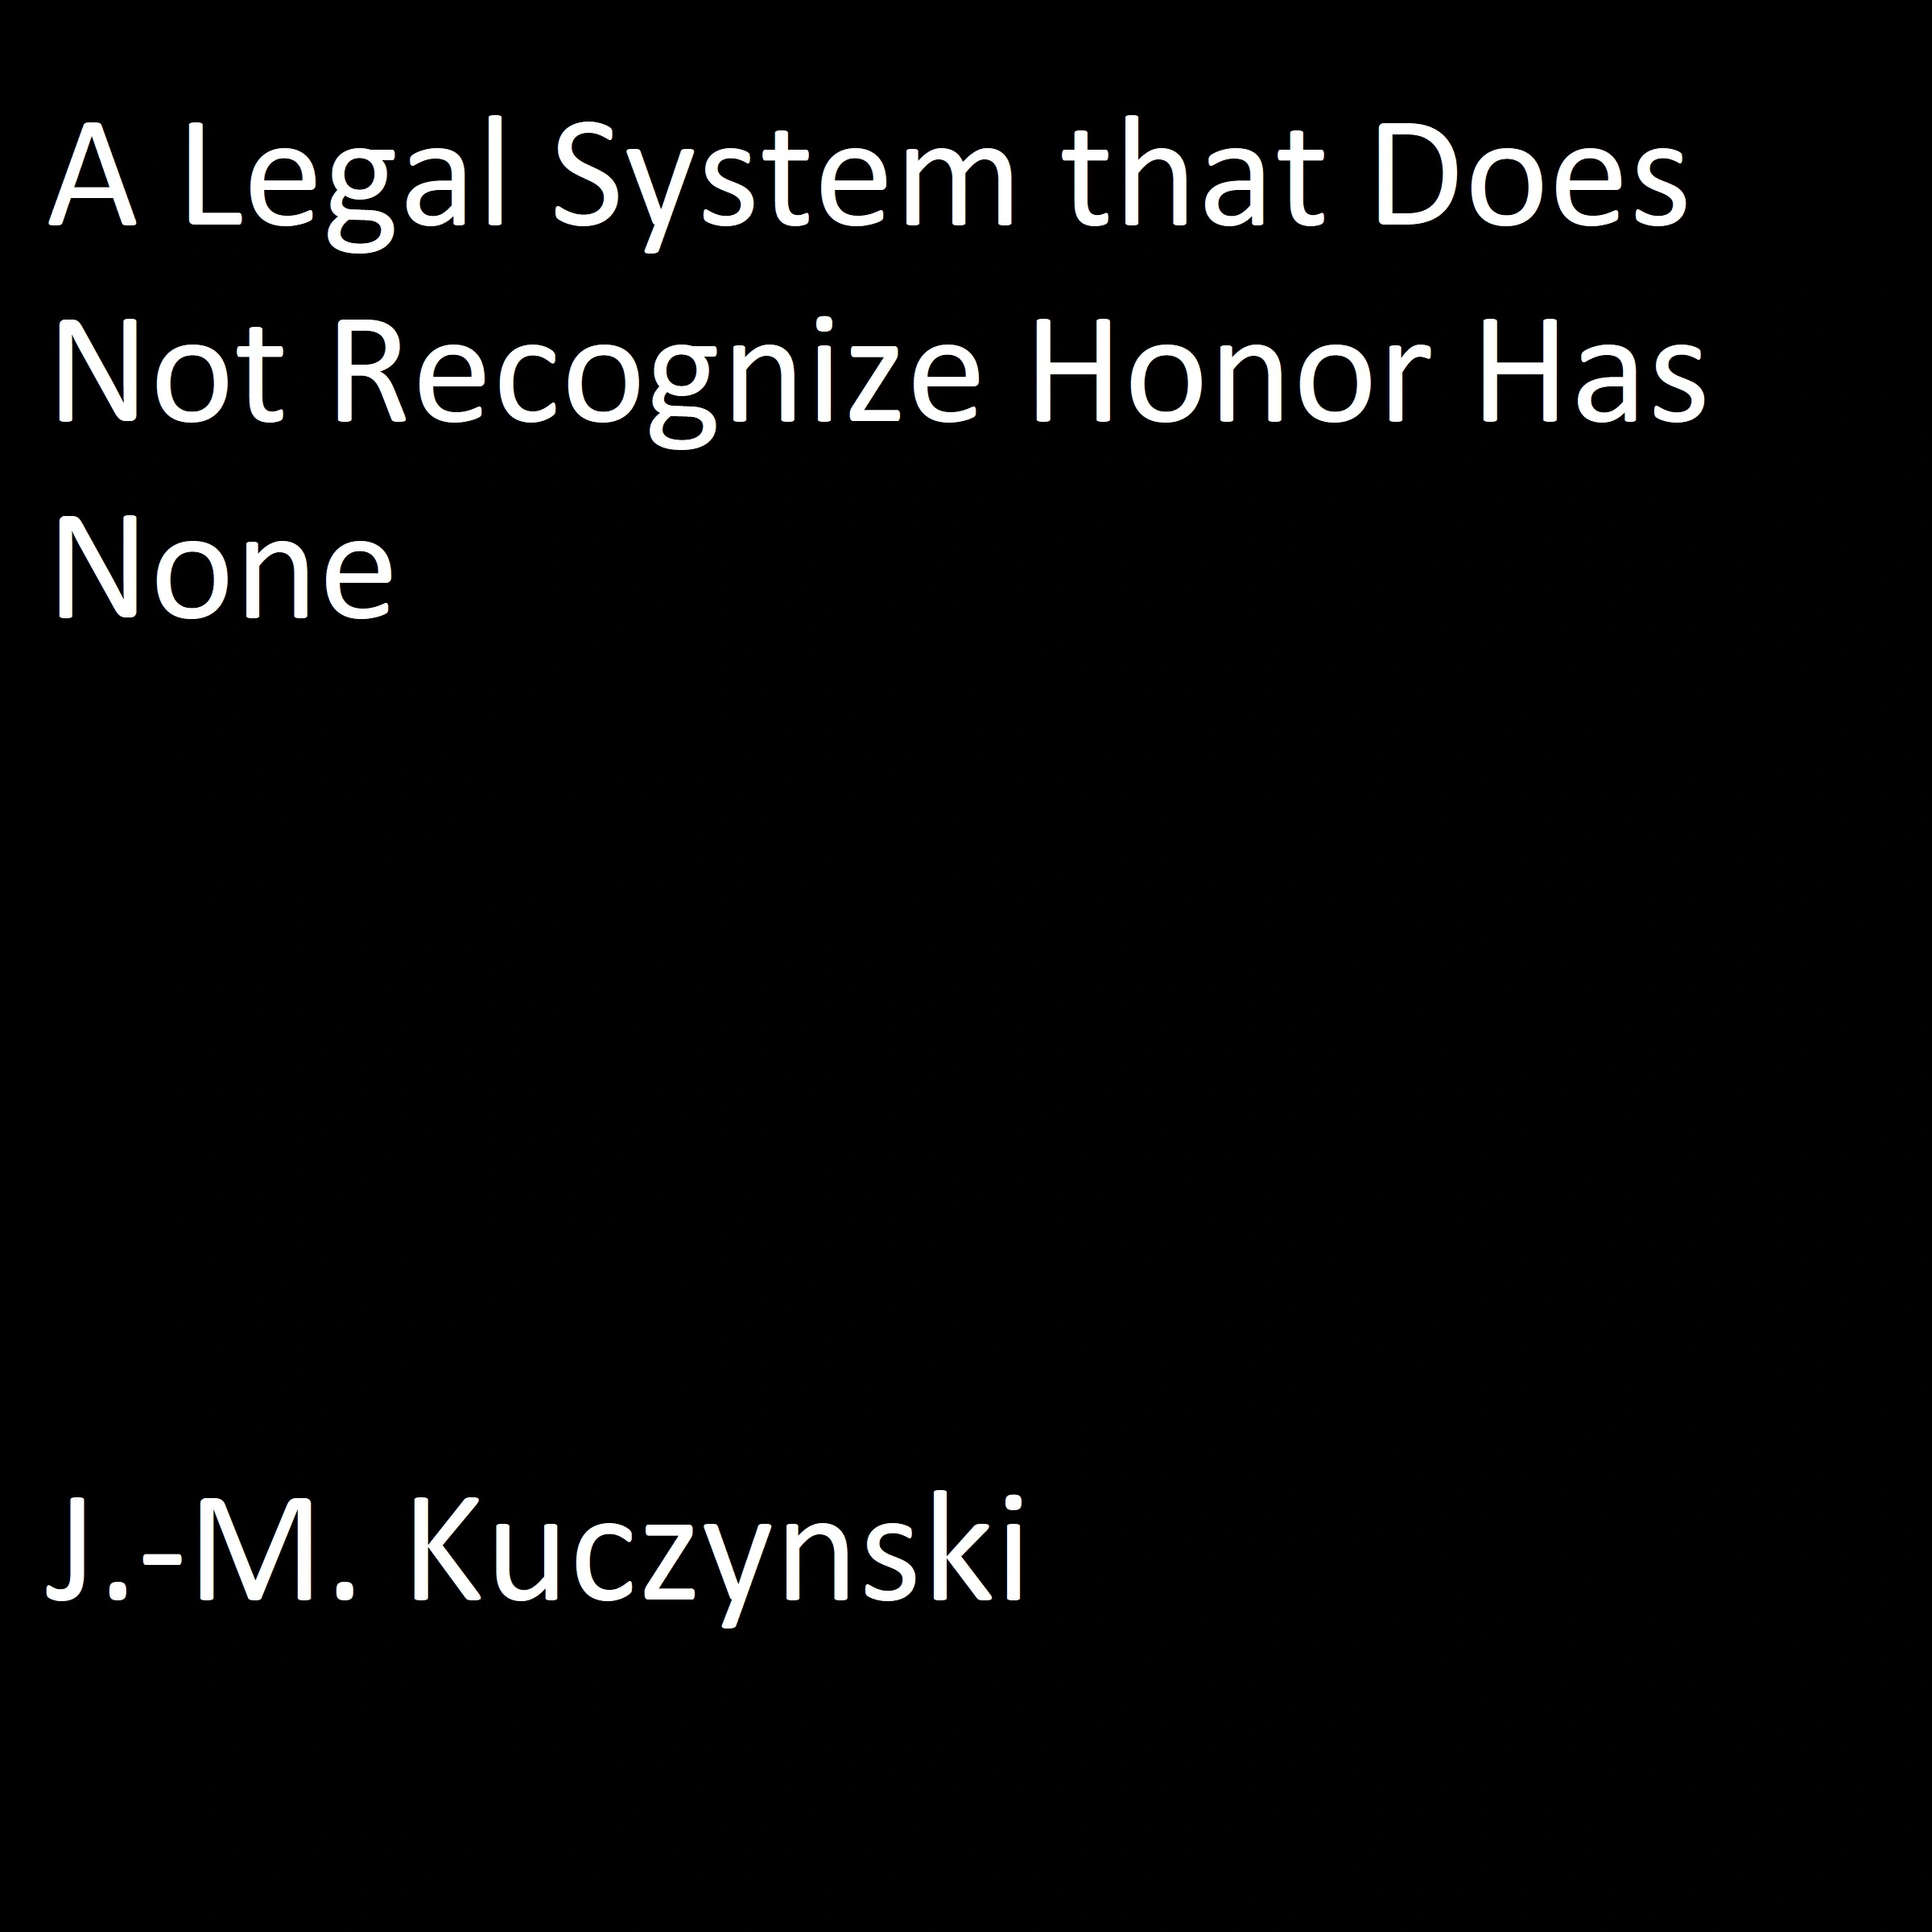 A Legal System that Does Not Recognize Honor Has None Audiobook by J.-M. Kuczynski